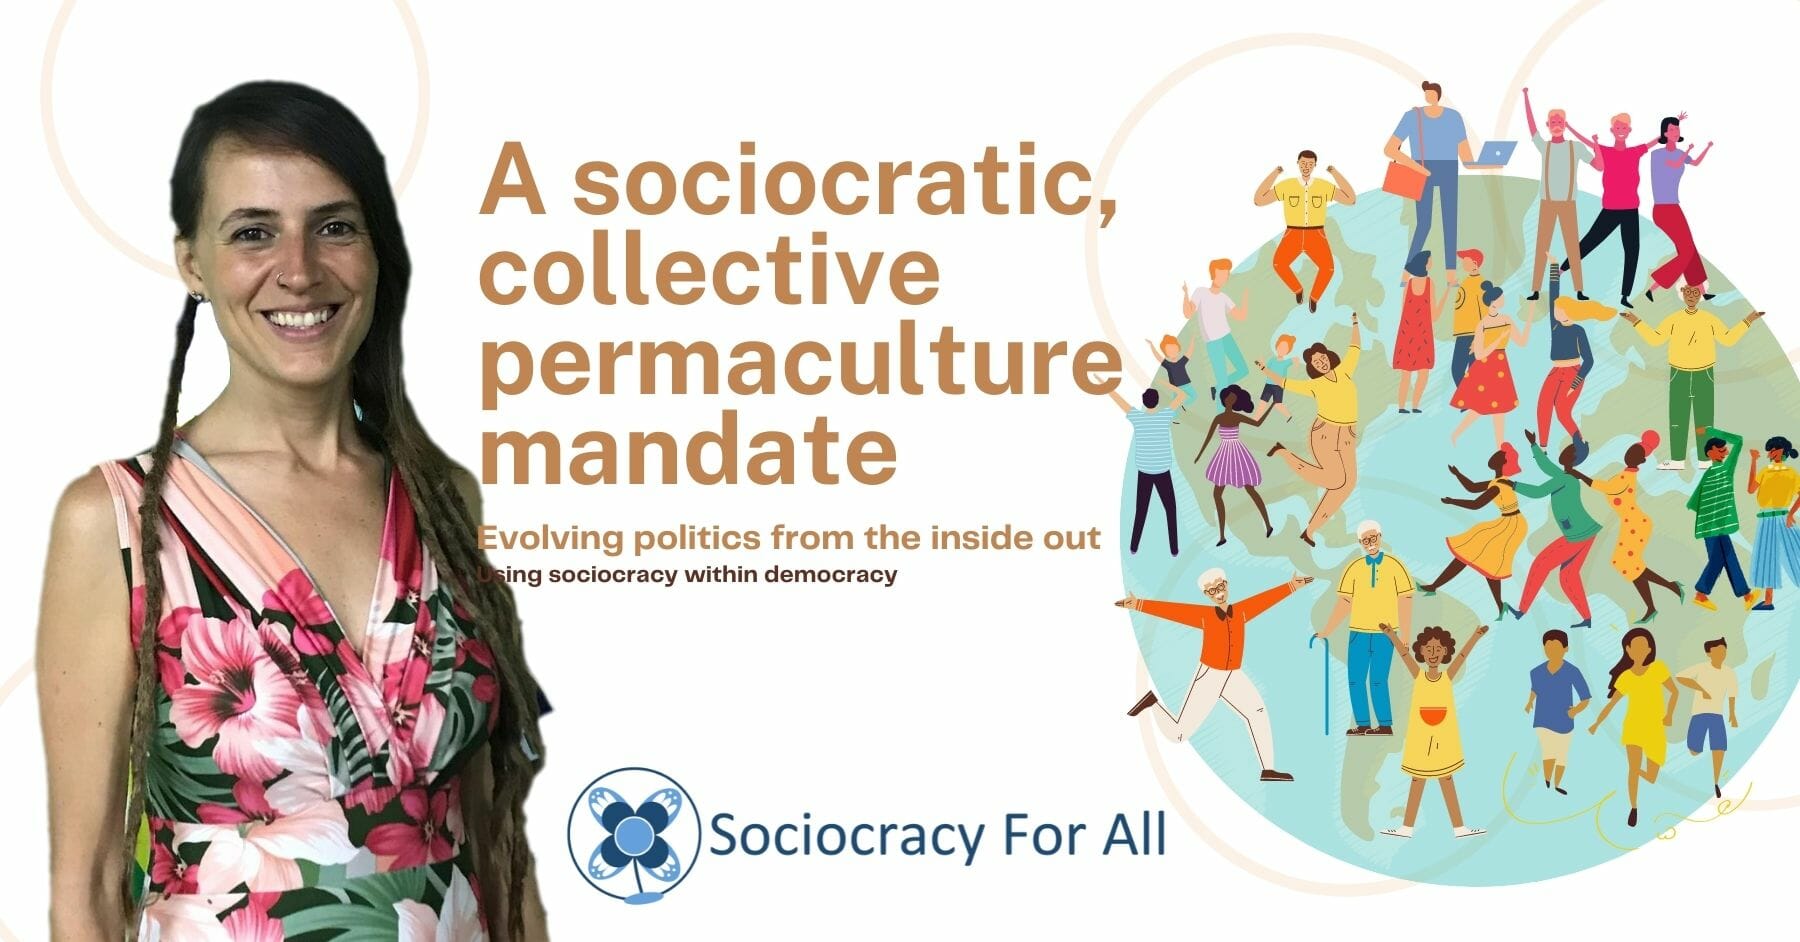 improving democracy from the inside out 1 - permaculture and sociocracy,permaculture in sociocracy - Sociocracy For All